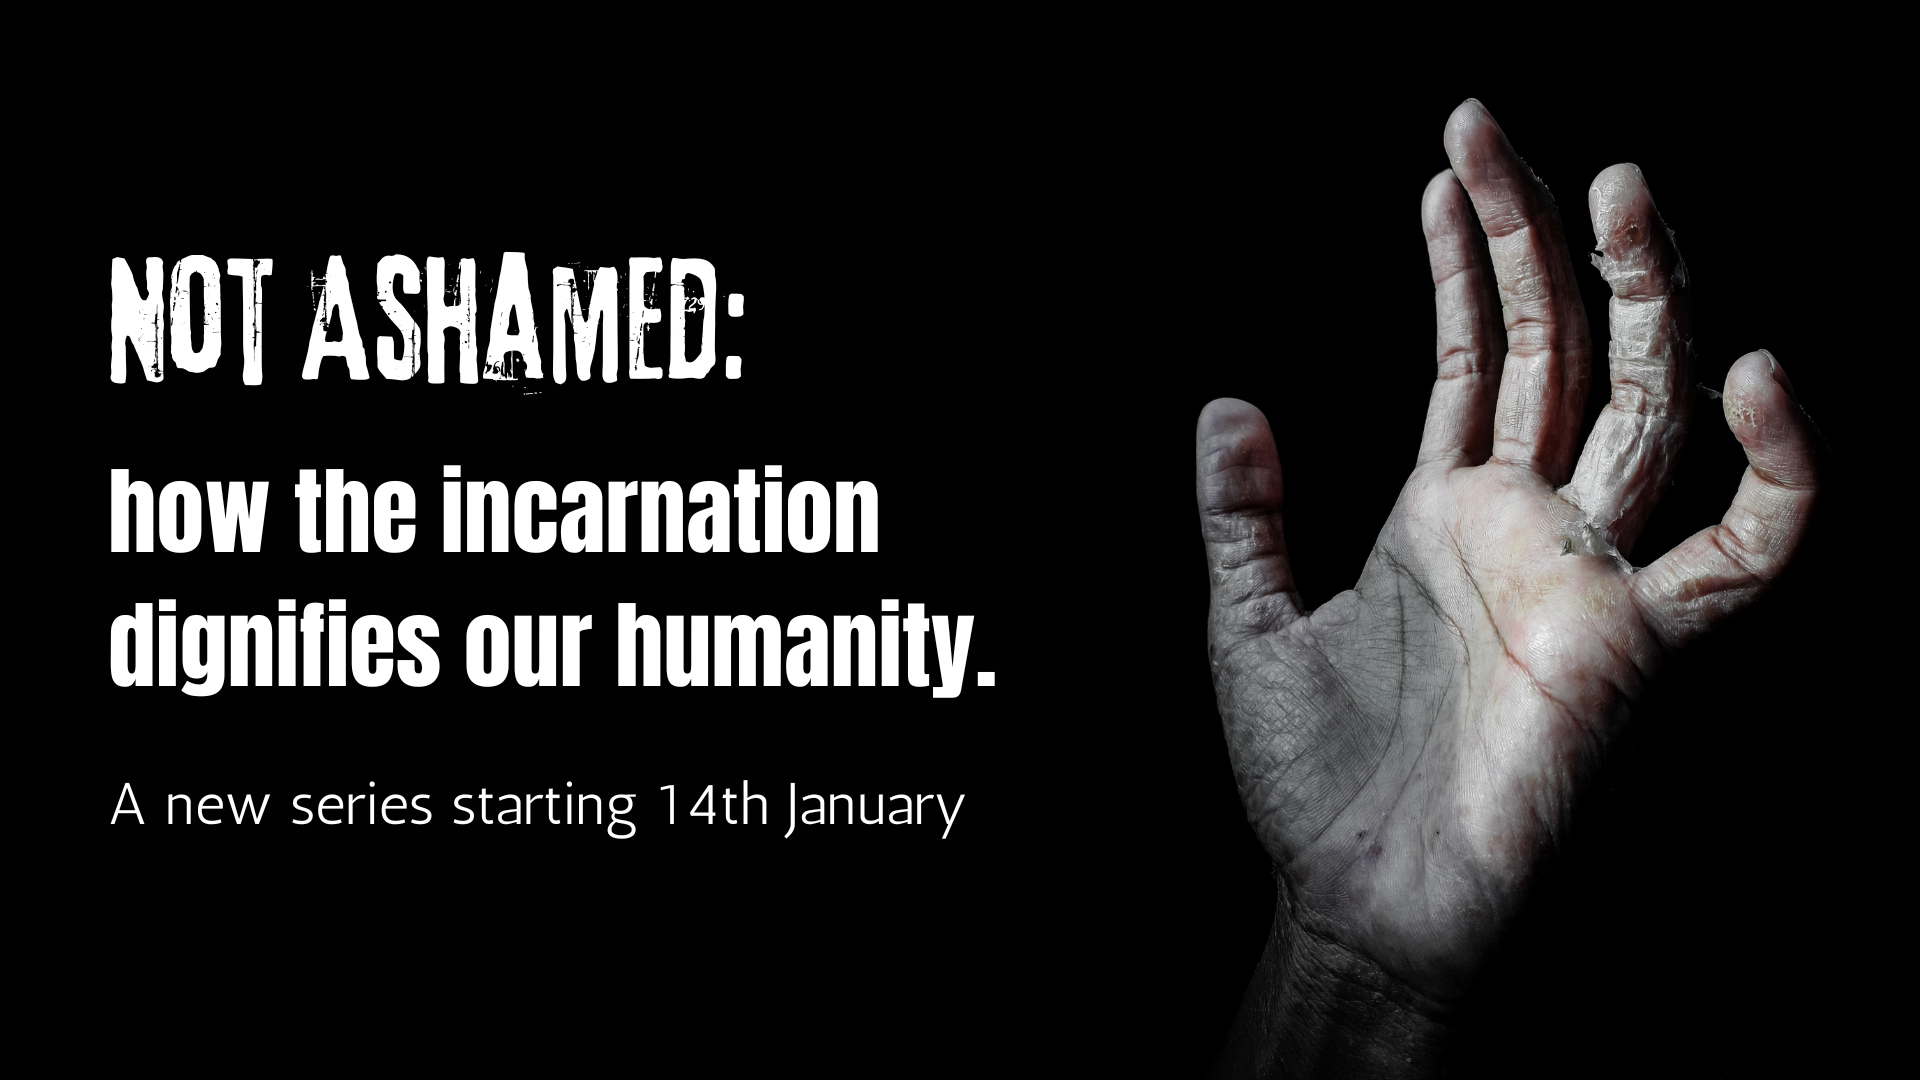 Not Ashamed: how the incarnation dignifies our humanity.